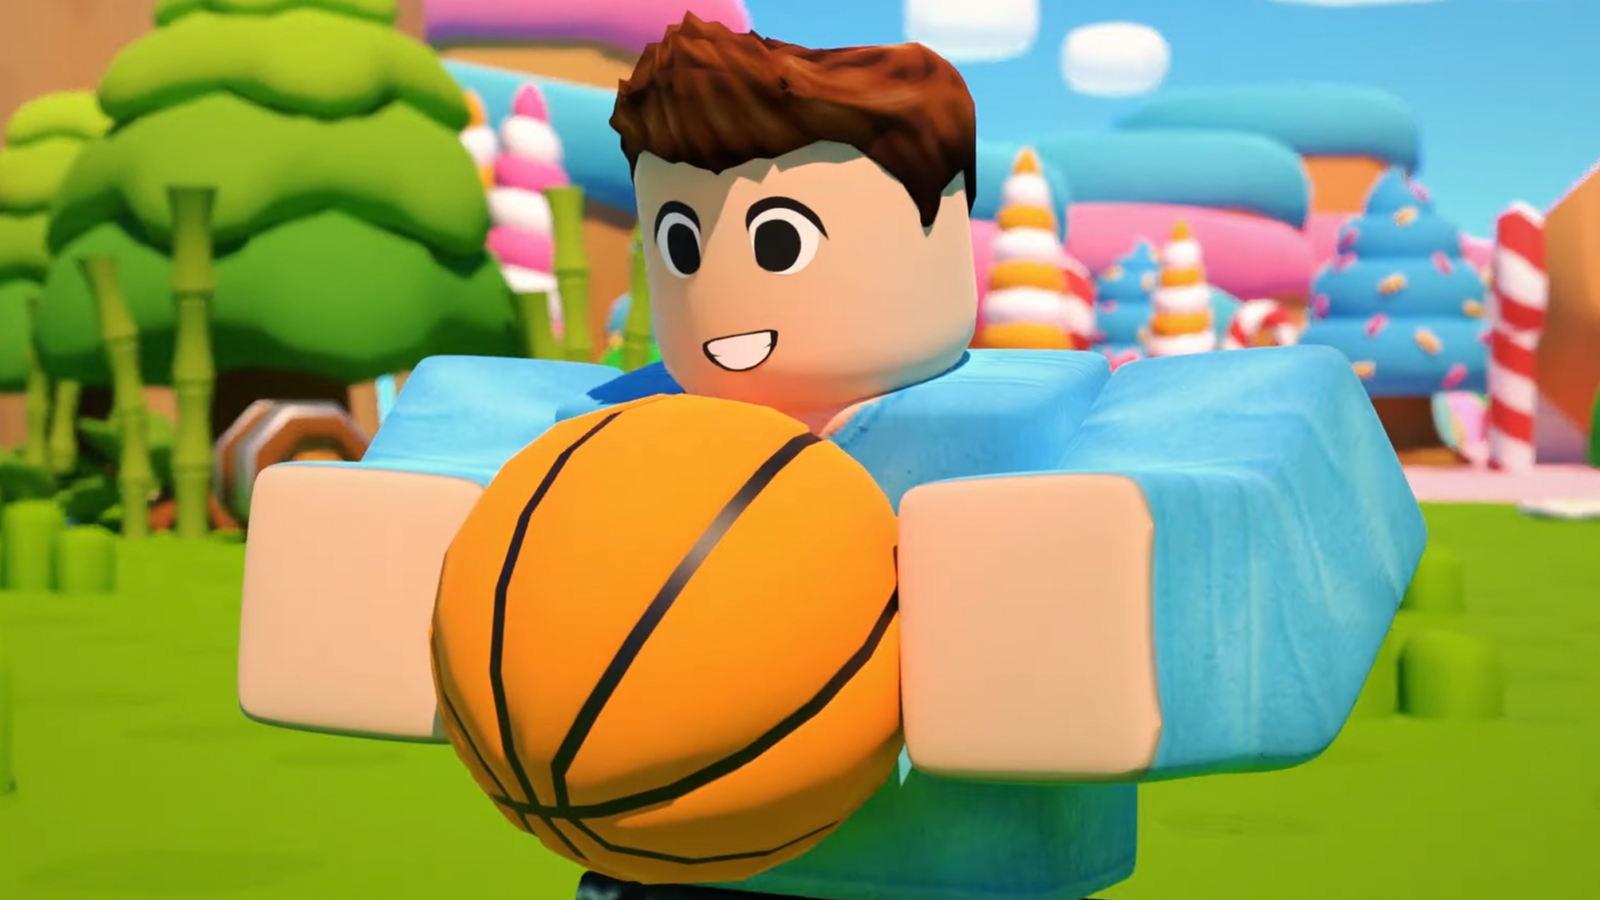 Whats a game you like that no one knows about? : r/roblox